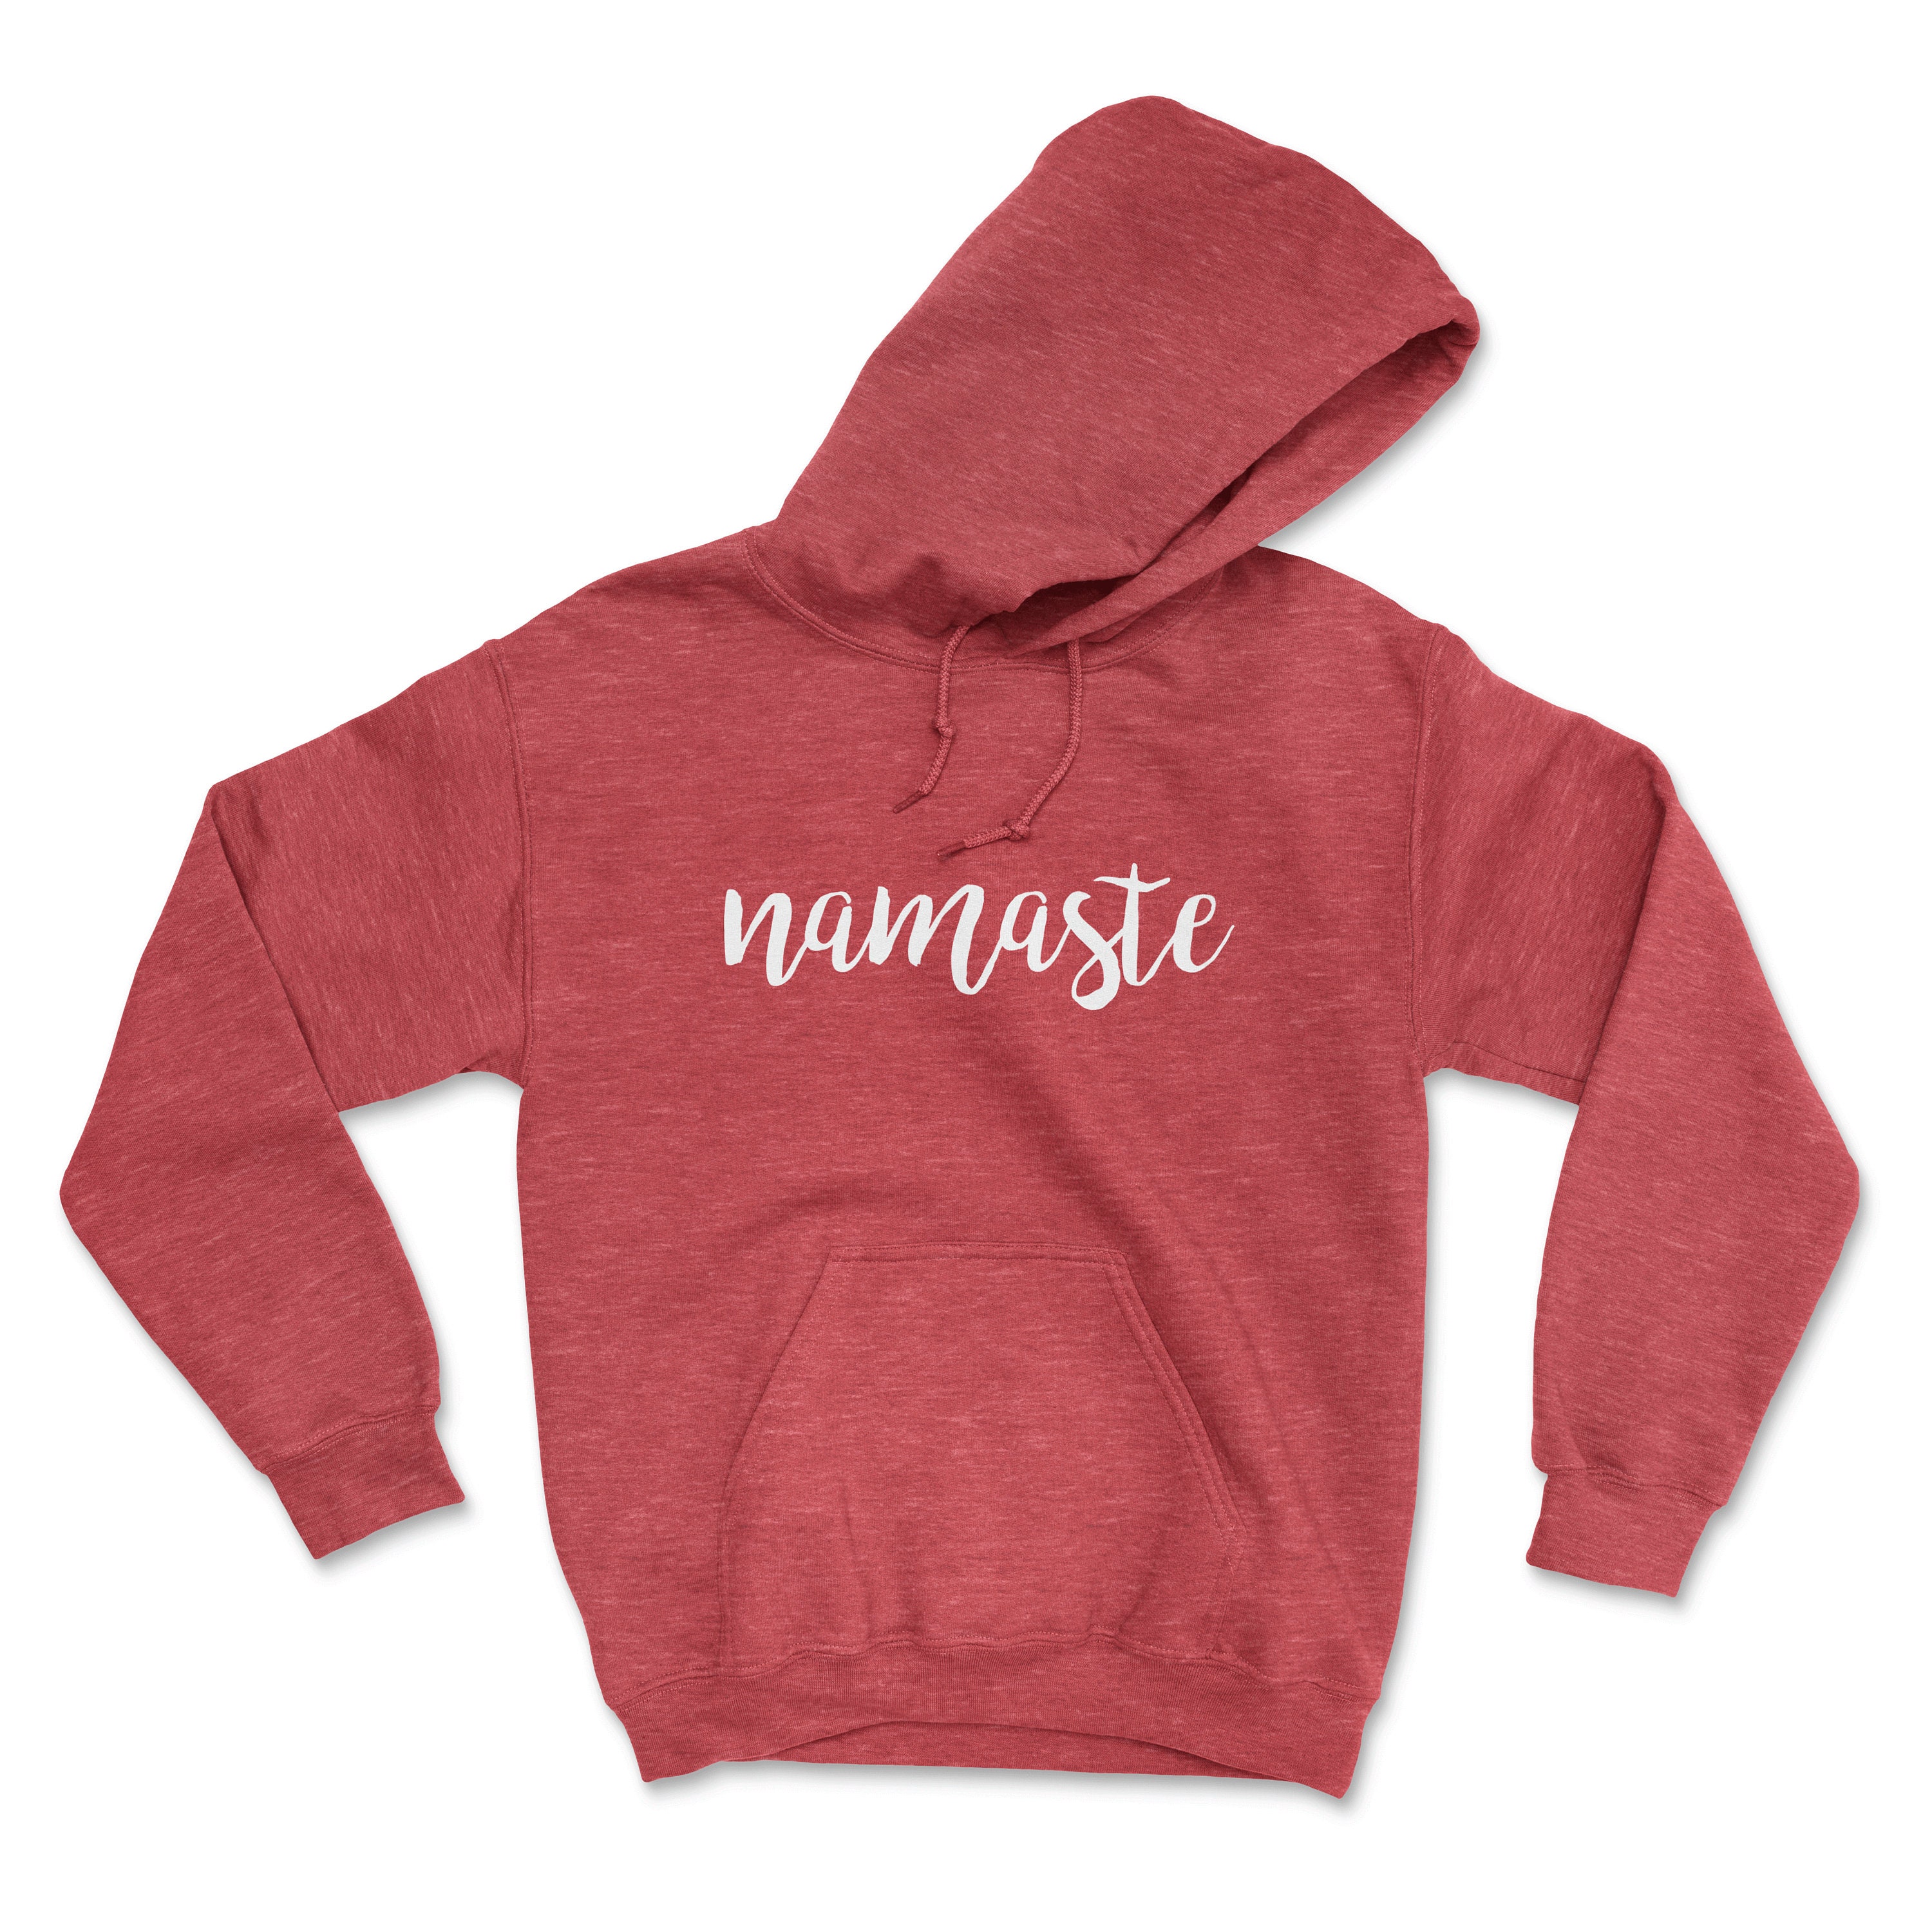 NAMASTE Hoodie - Mens/Unisex Classic Fit Hooded Sweatshirt - all sizes and  colors - emit the proper energy with this yoga hoodie